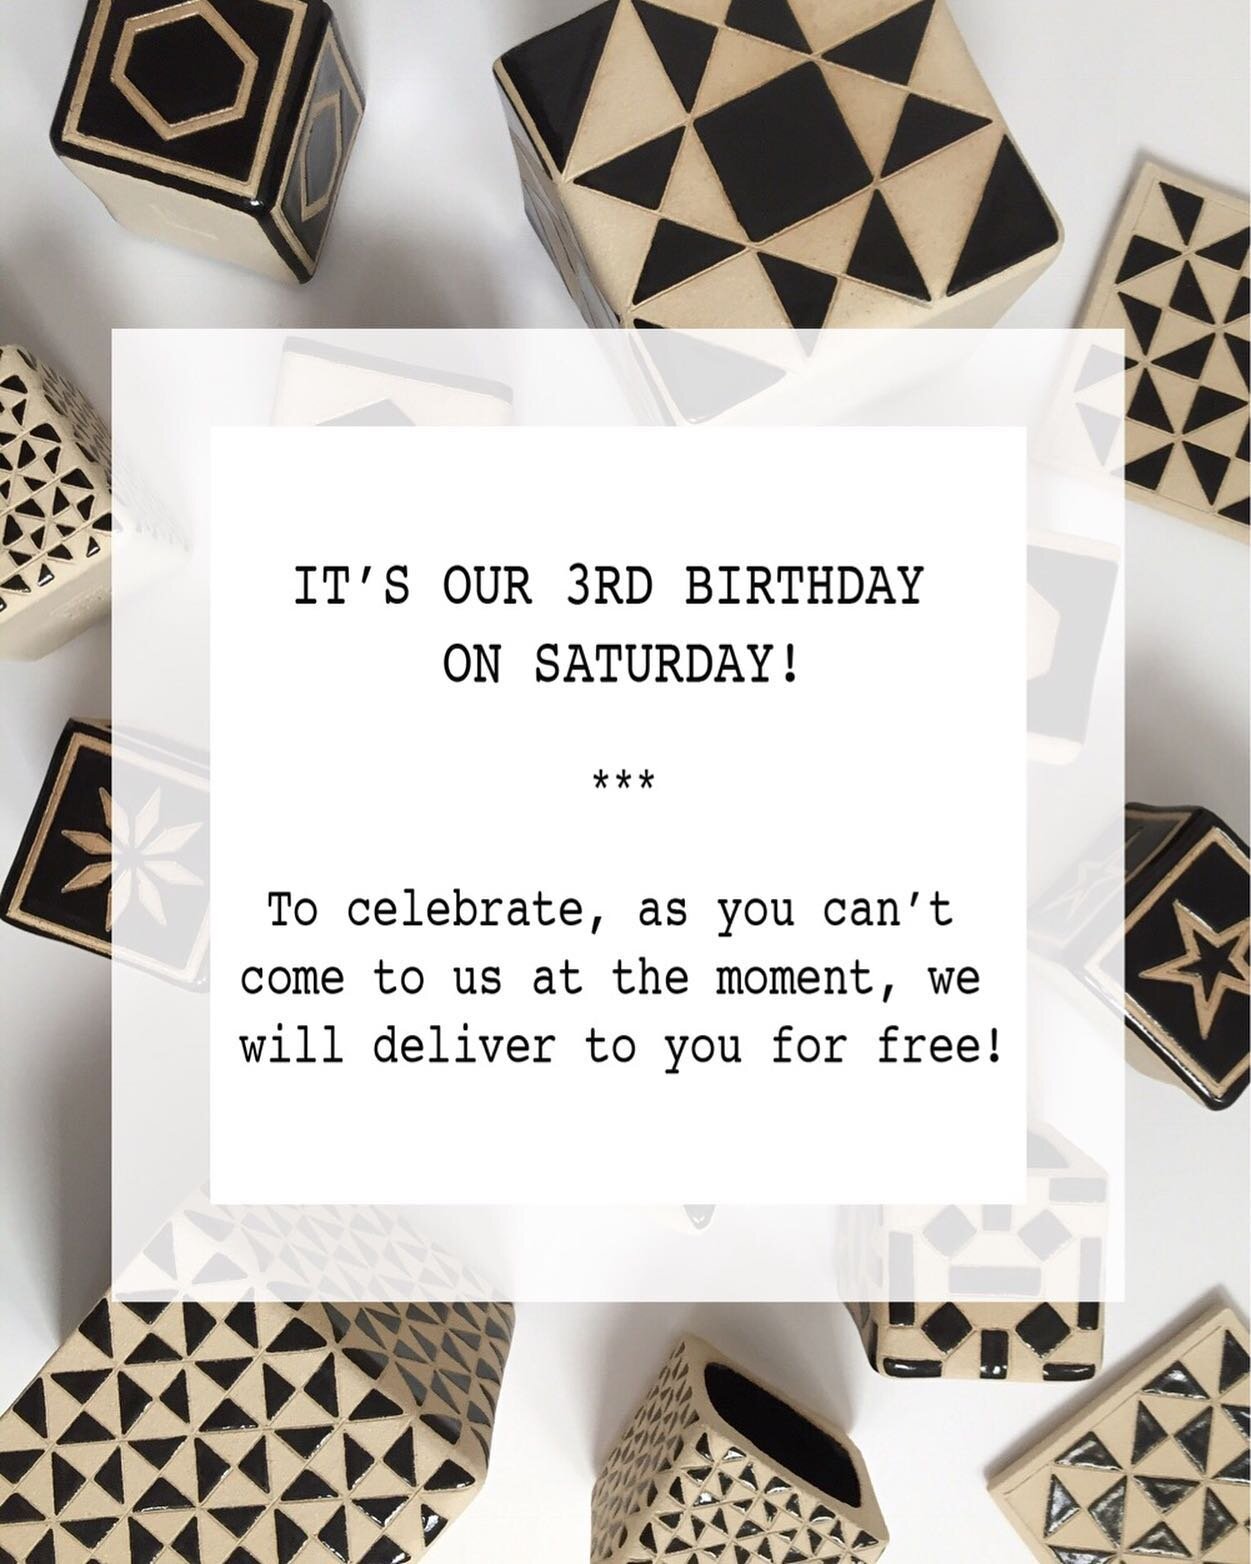 As a gift to you, we will be offering all customers free postage on all orders placed between Saturday 3rd October and Friday 9th October! Use code BIRTHDAY at checkout. Online shop link in bio. This offer applies to shipments within the U.K. only #3